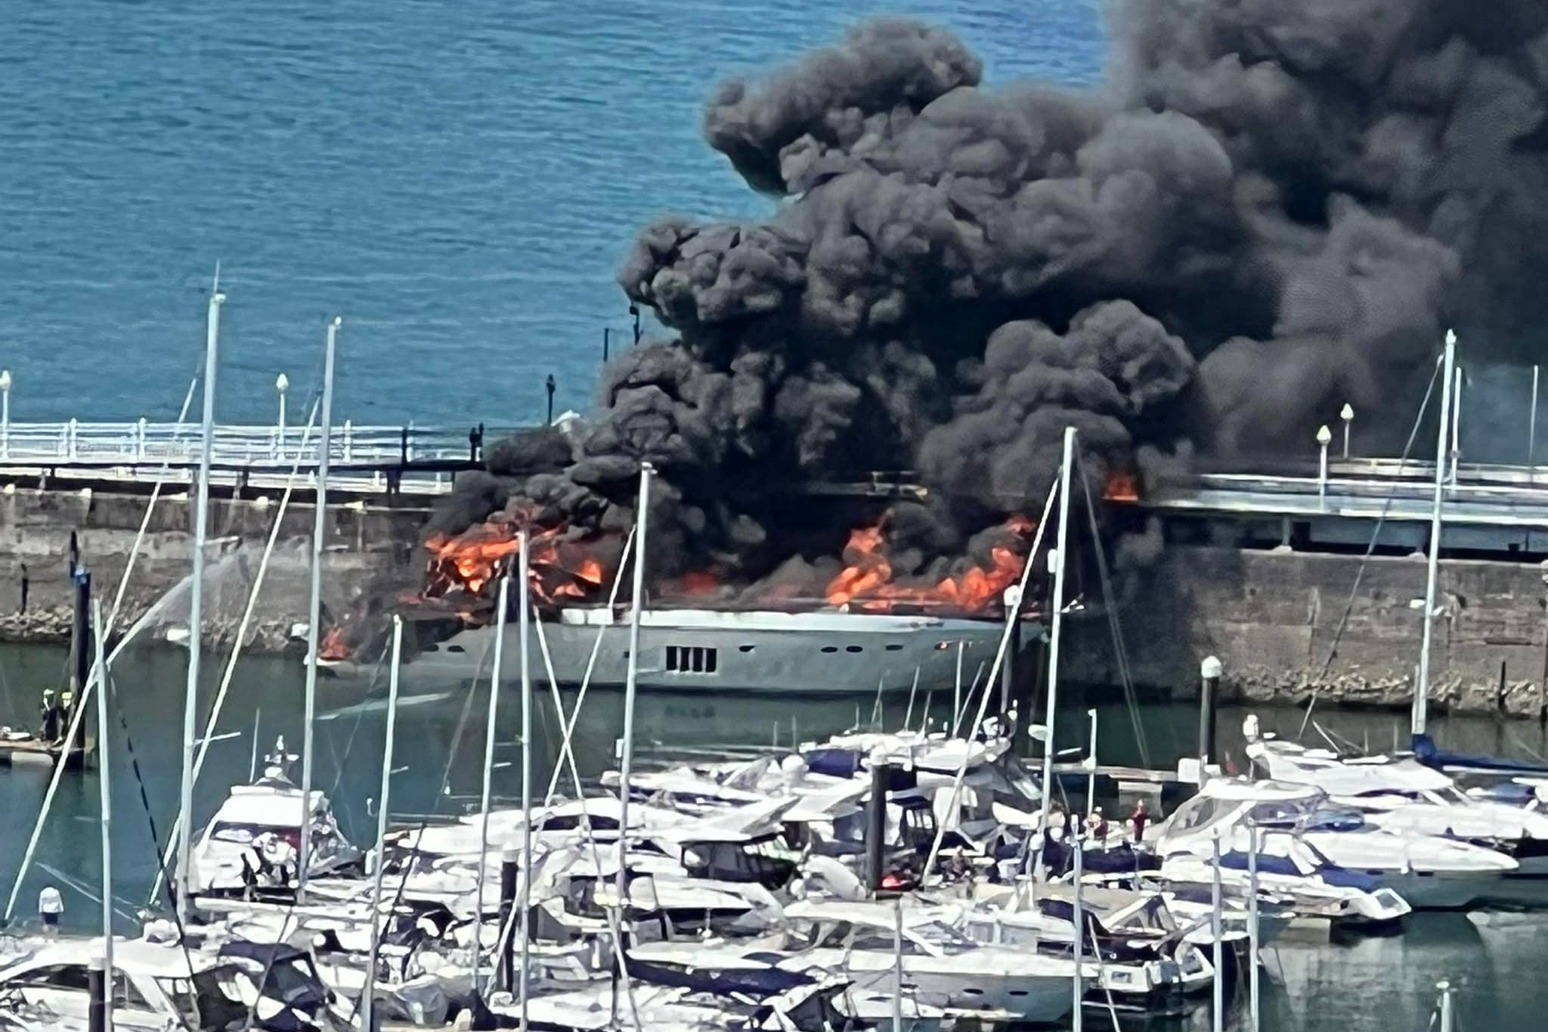 Major clean-up in marina after fire on superyacht carrying tonnes of fuel 